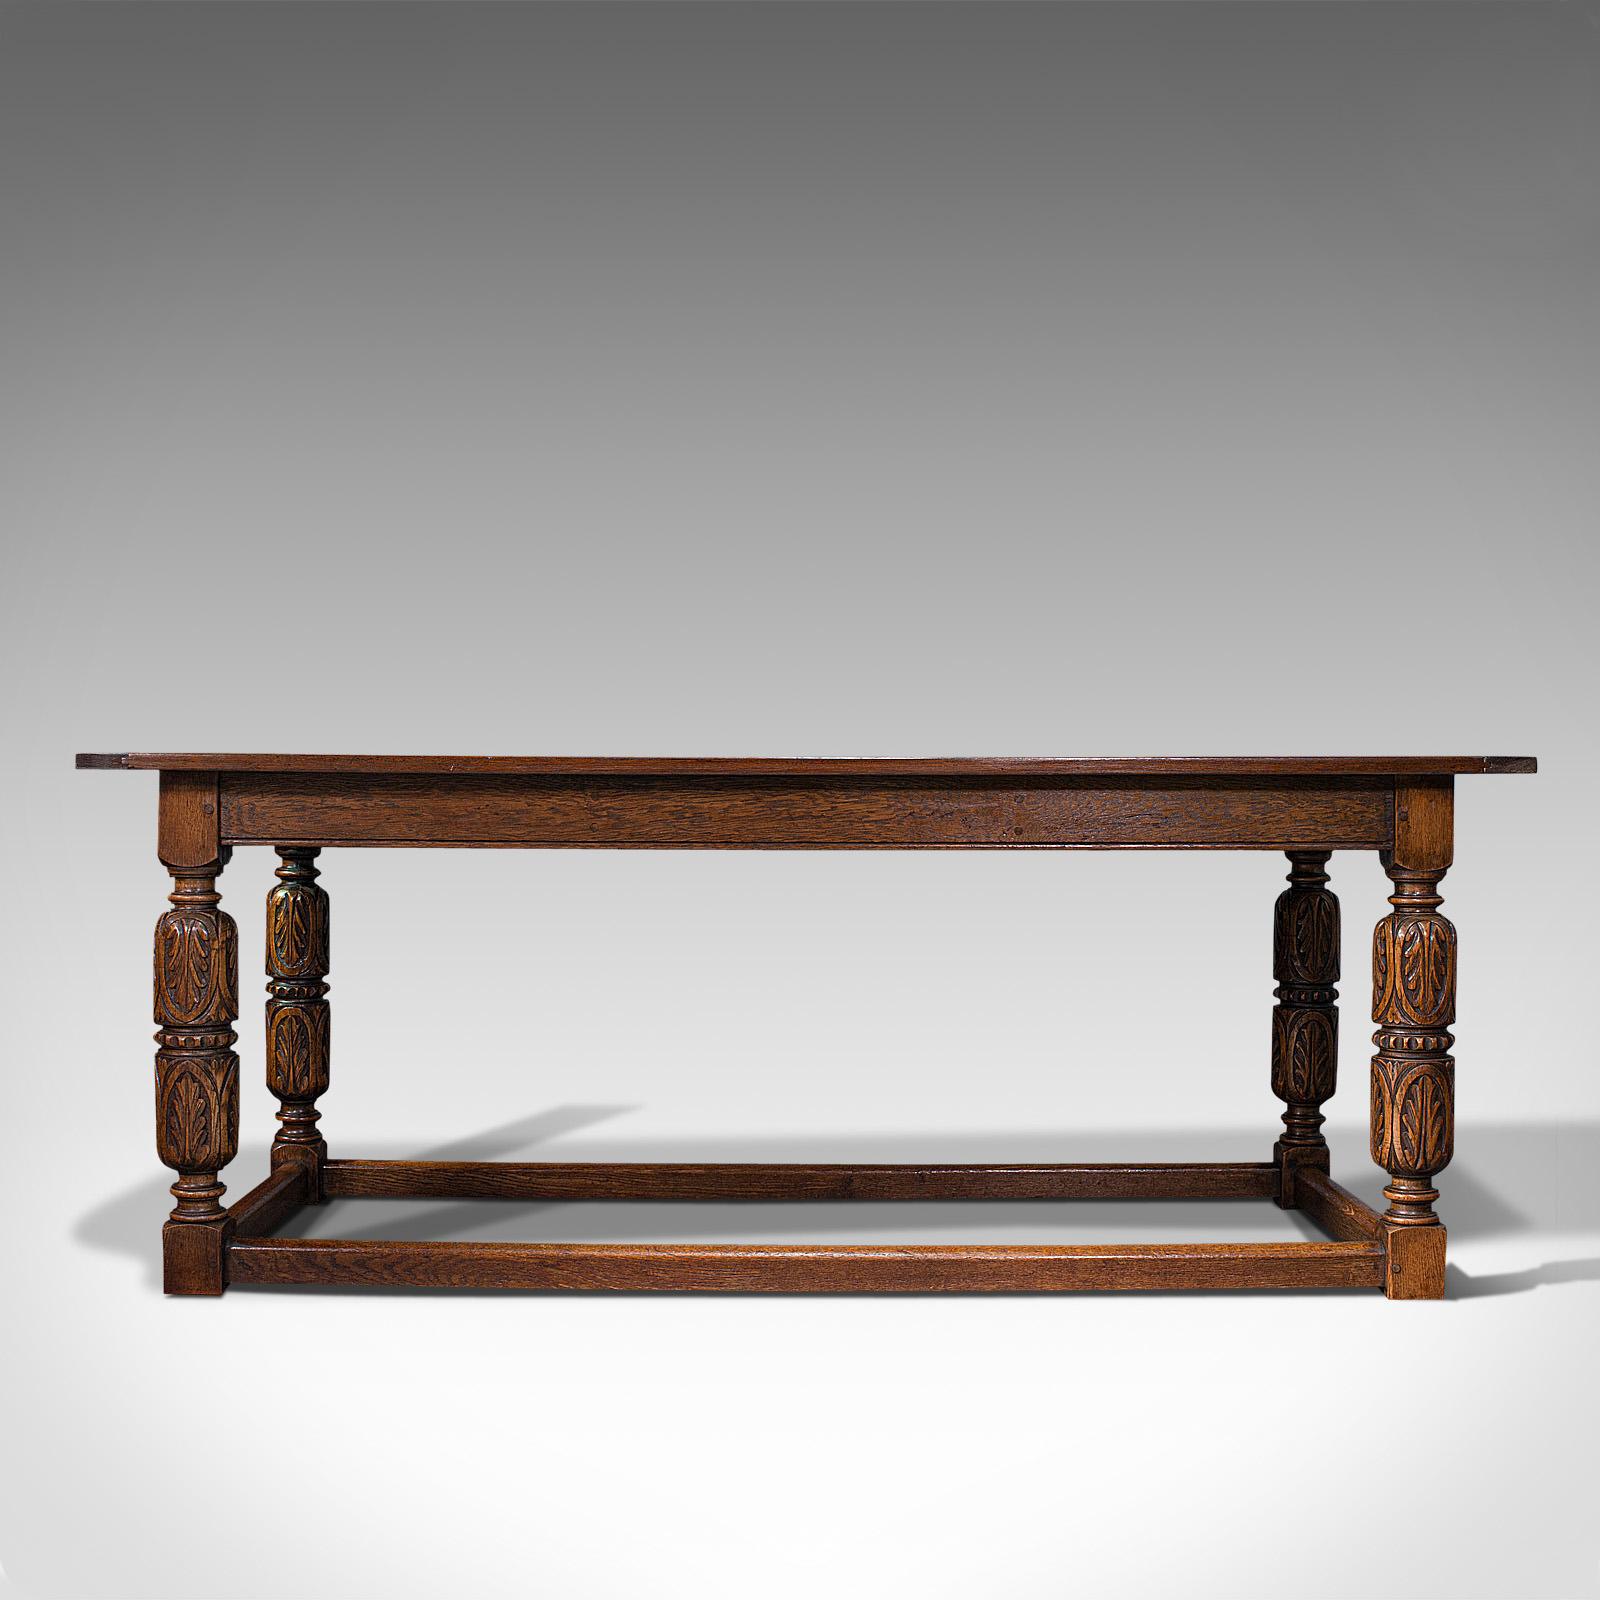 British Antique Refectory Table, English, Oak, Dining, Jacobean Revival, Edwardian, 1910 For Sale